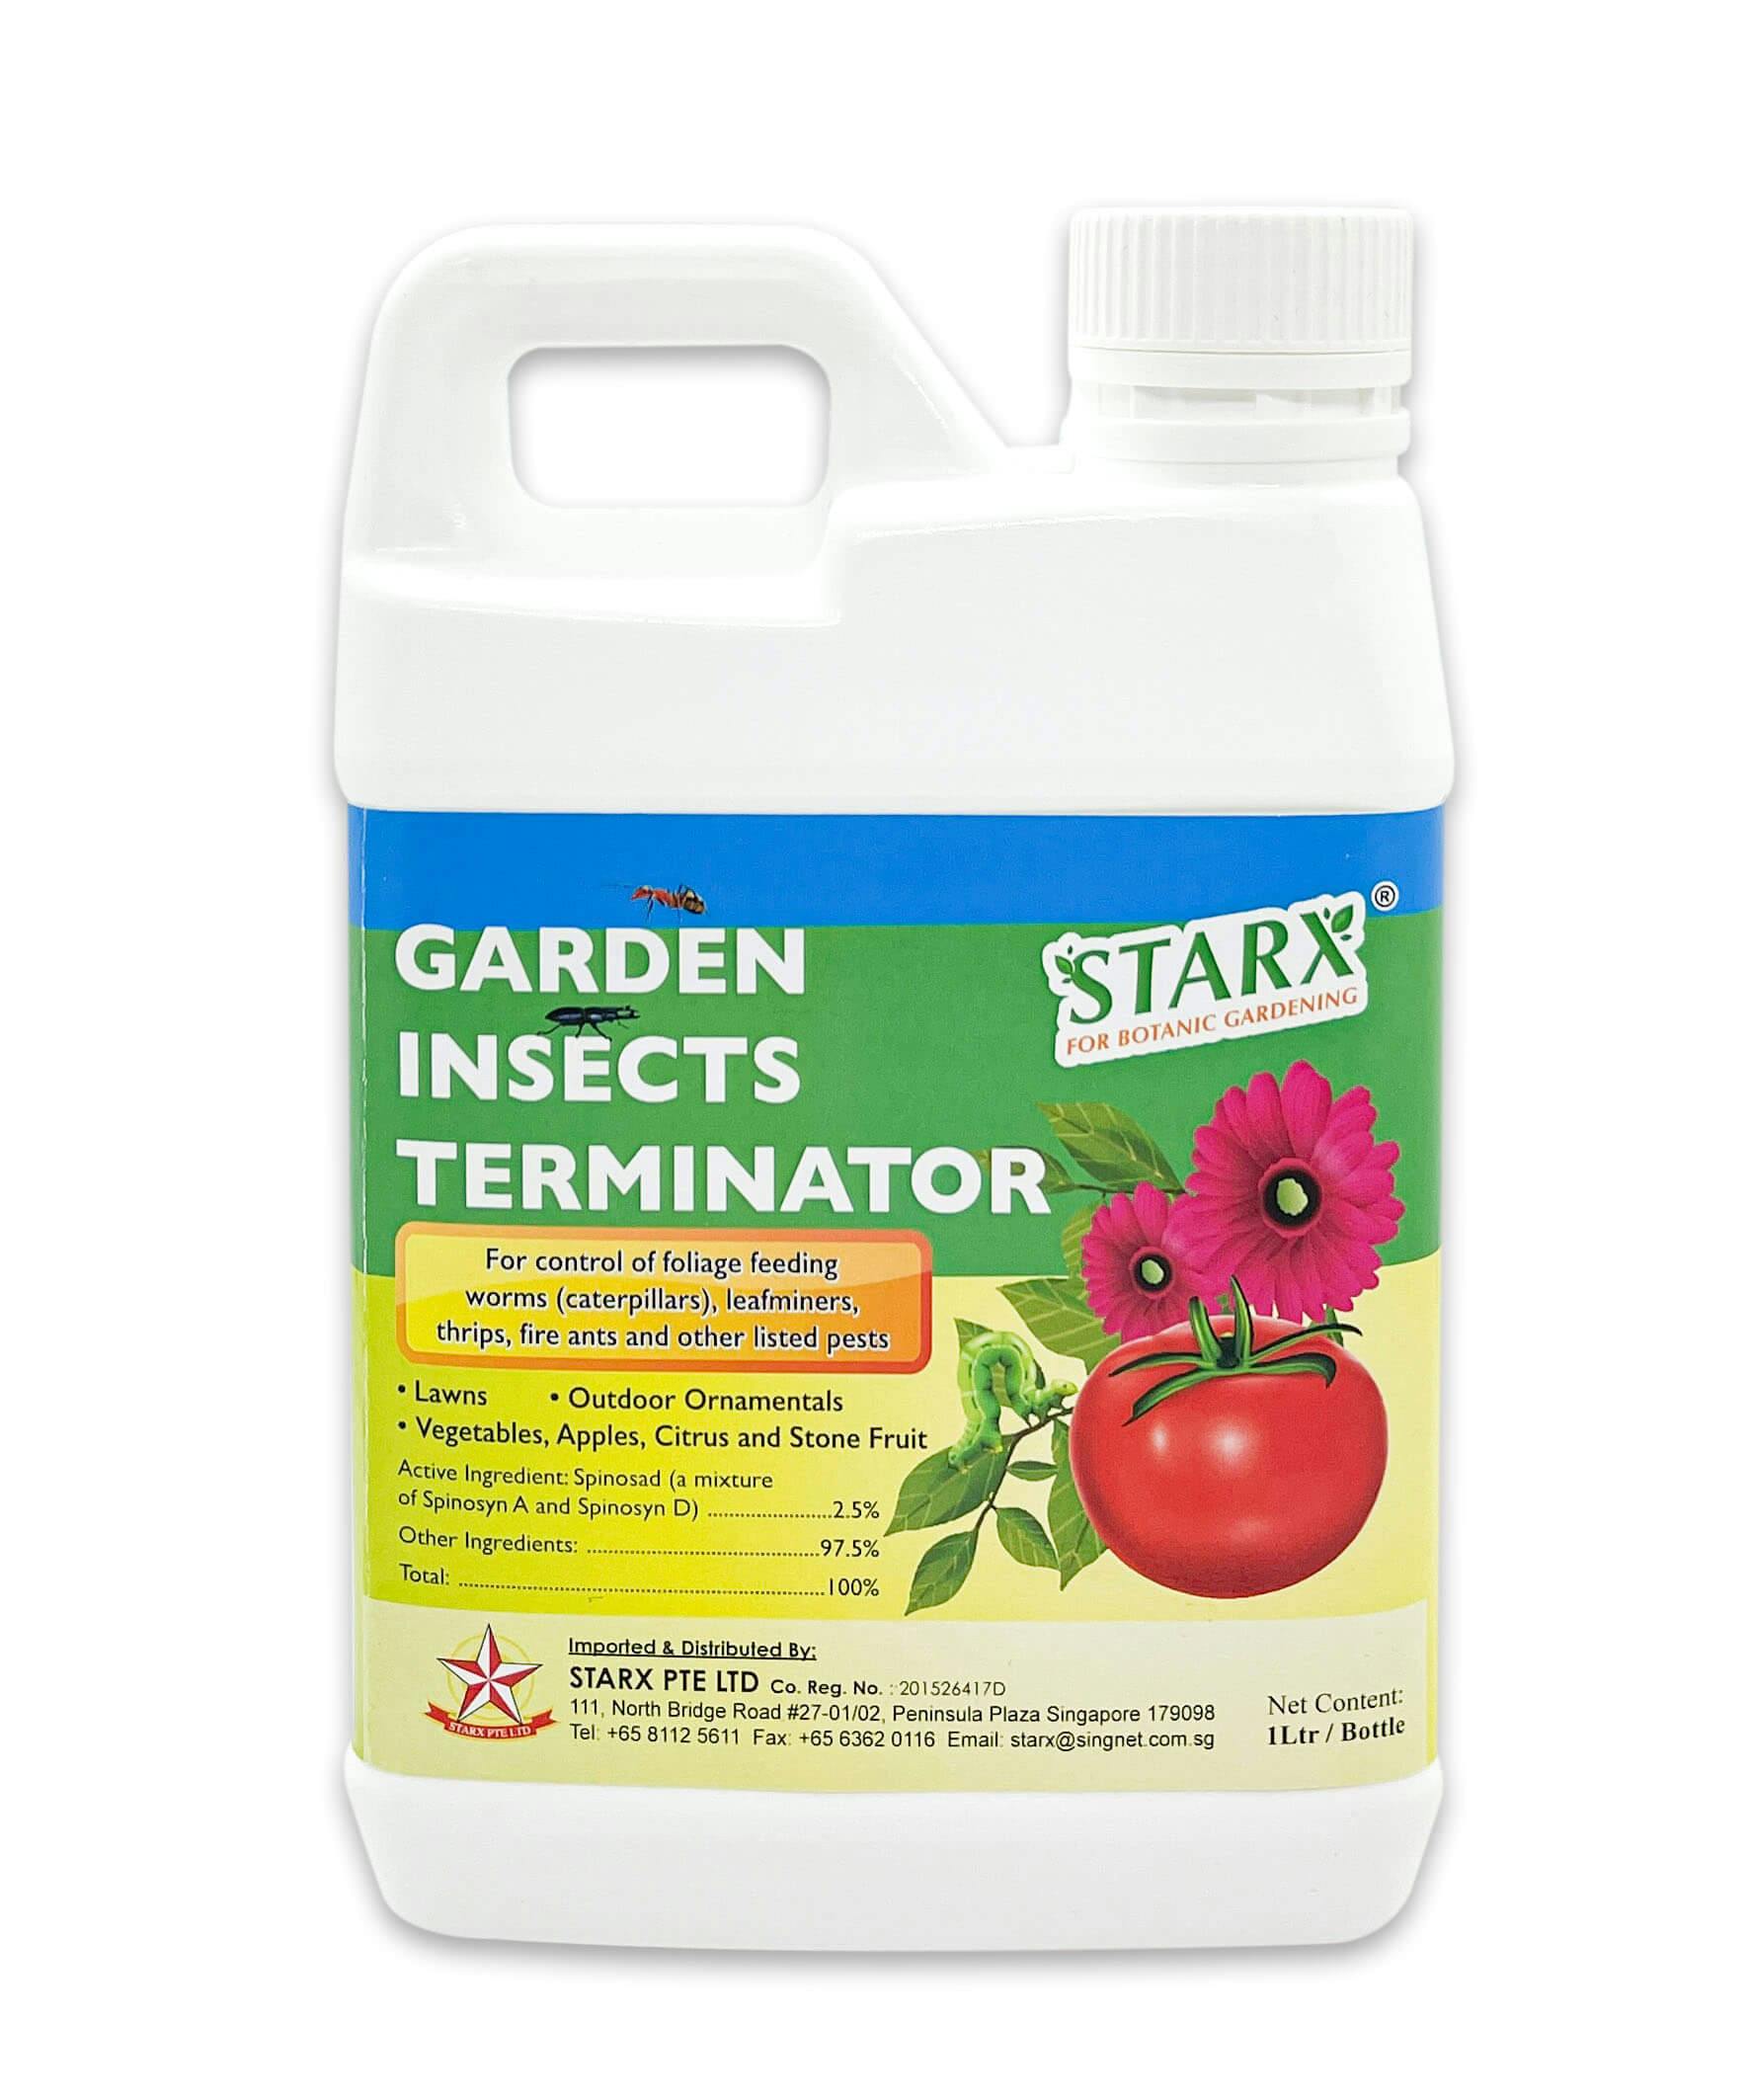 GARDEN INSECTS TERMINATOR CONCENTRATE